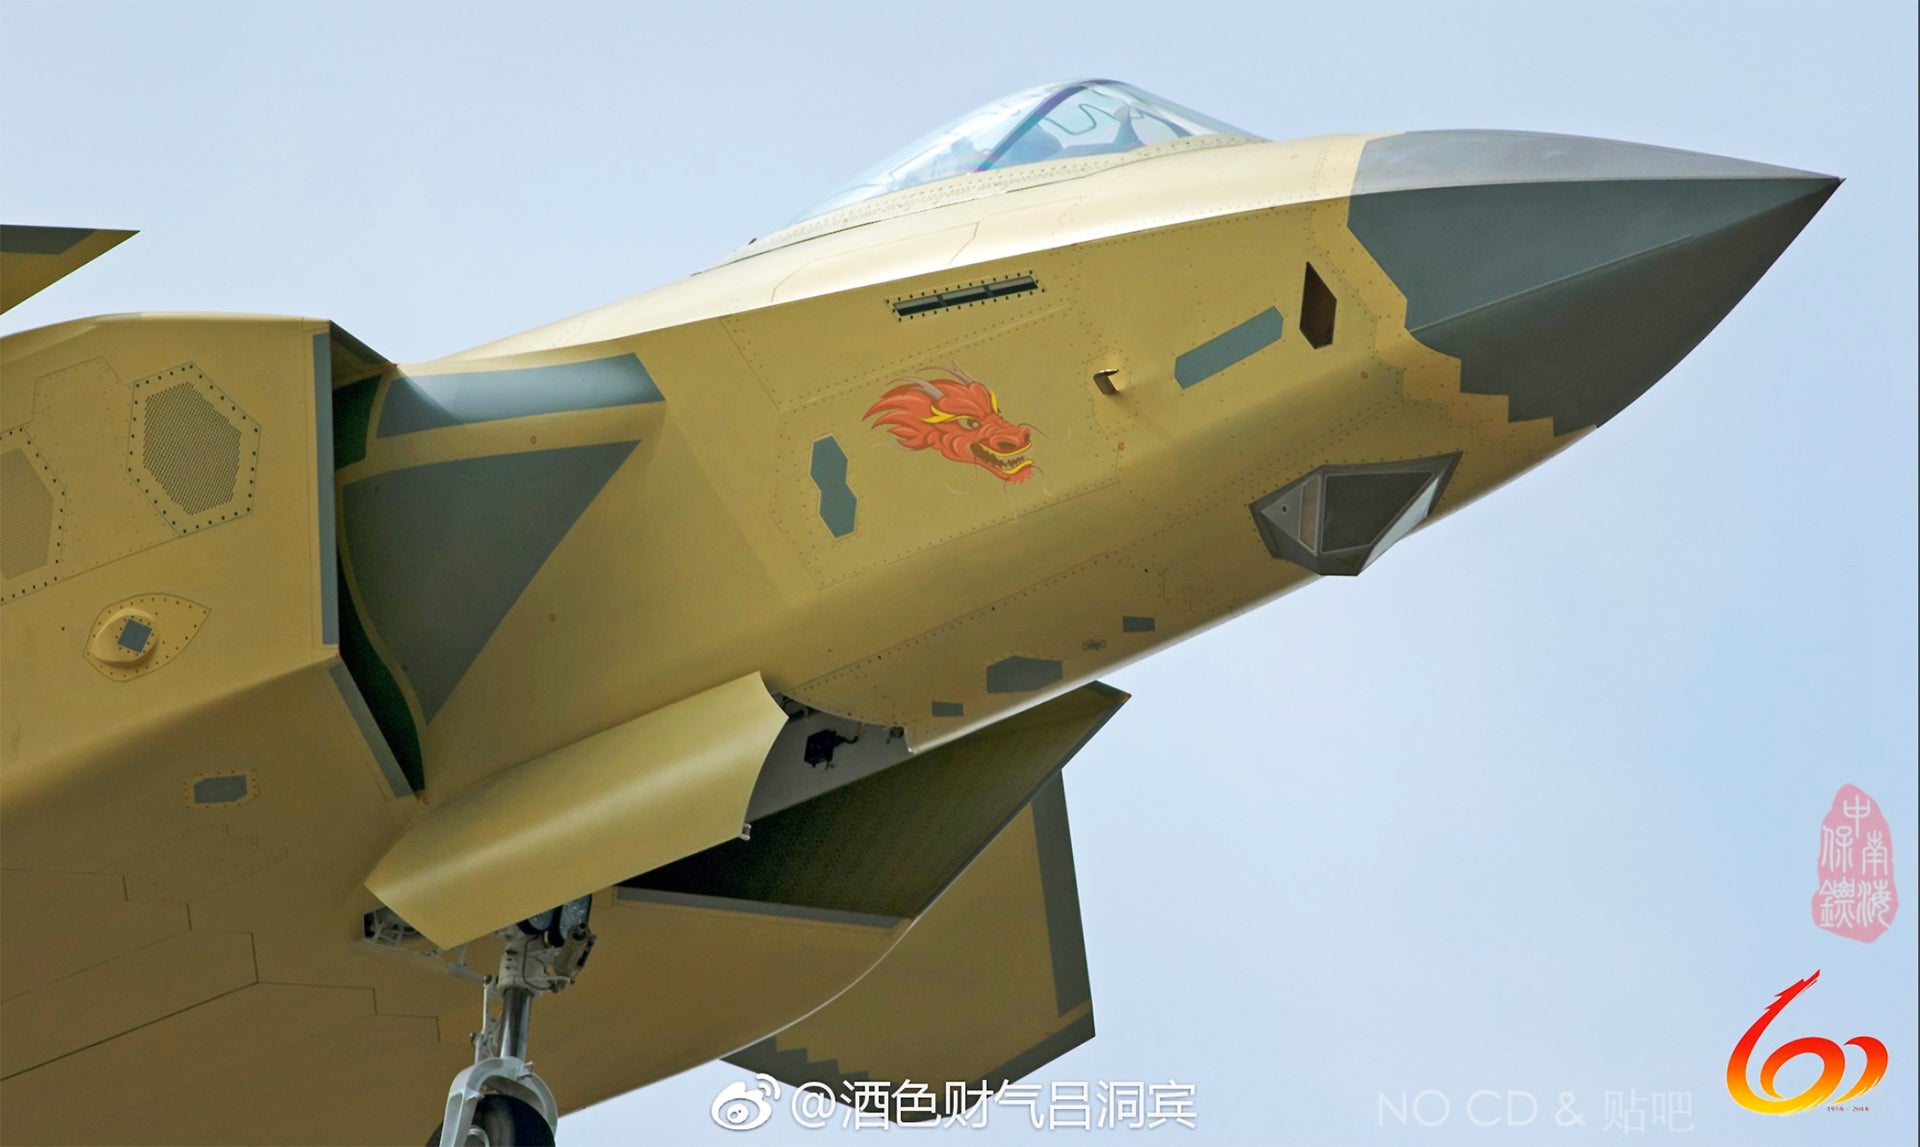 High-Quality Shots Of Unpainted Chinese J-20 Stealth Fighter Offer New  Capability Insights